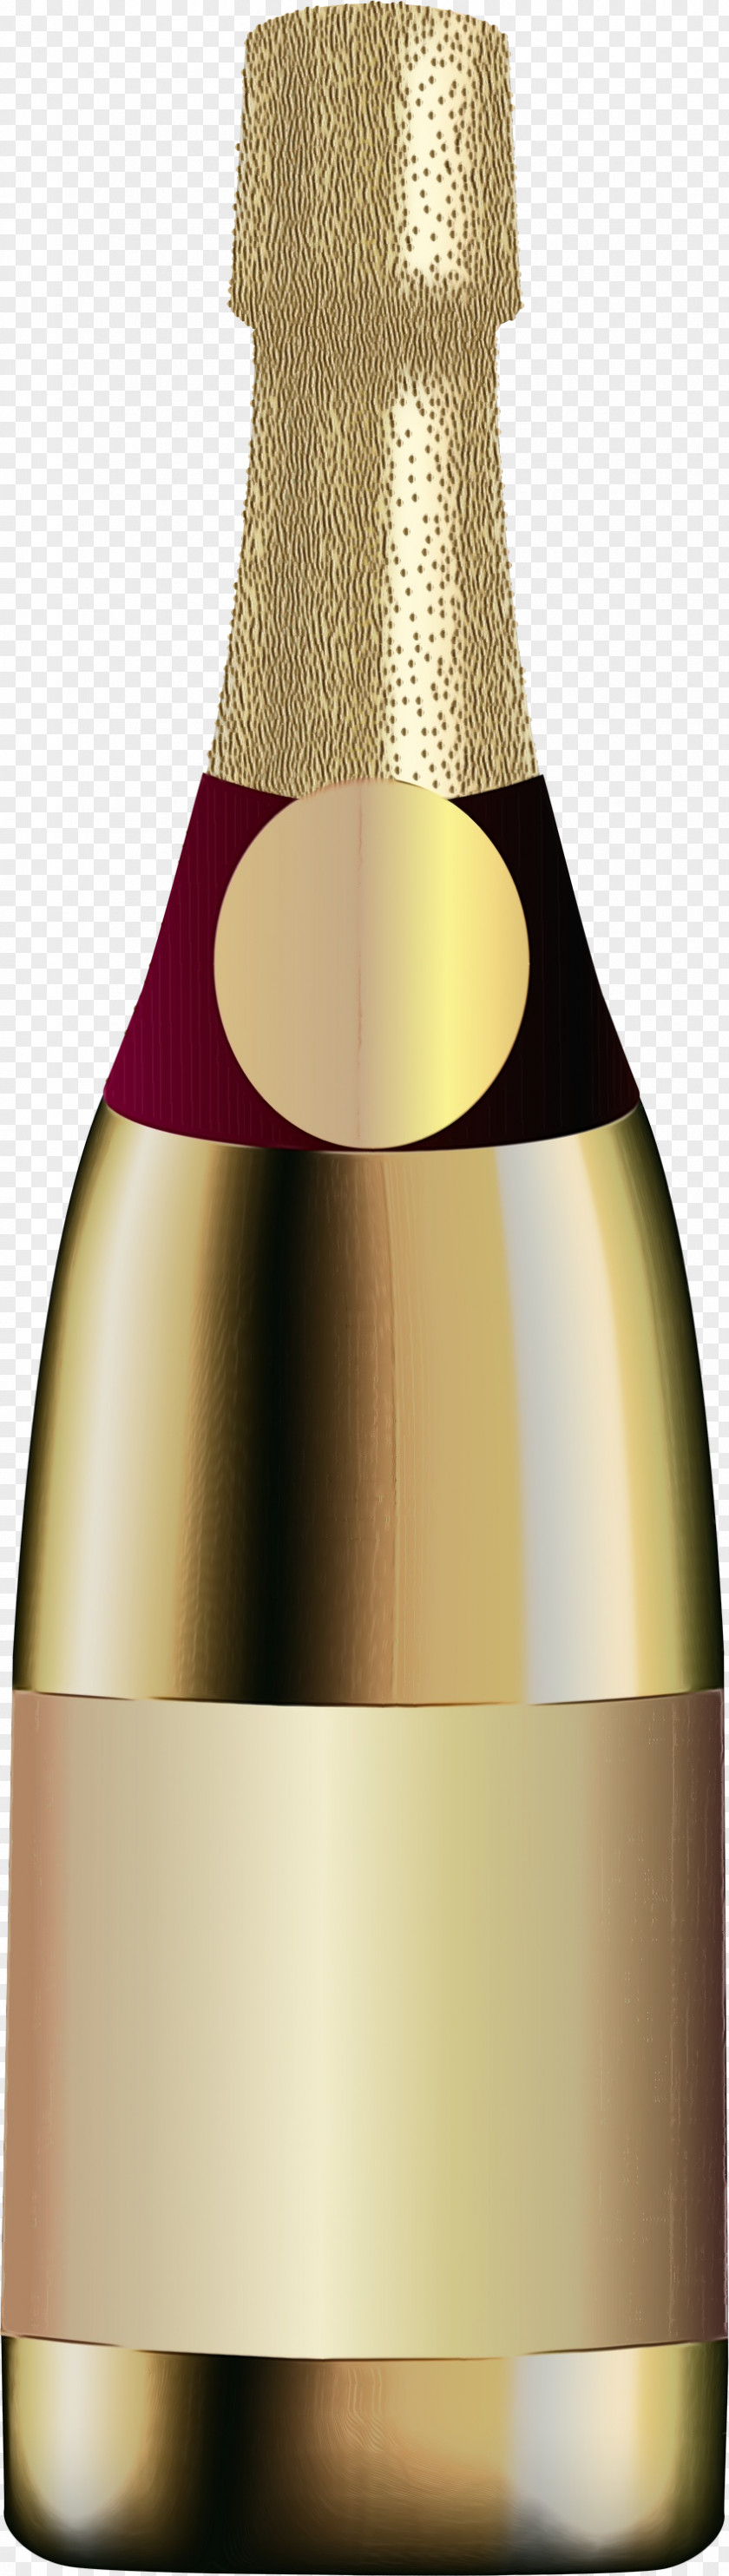 White Wine Glass Bottle Champagne PNG